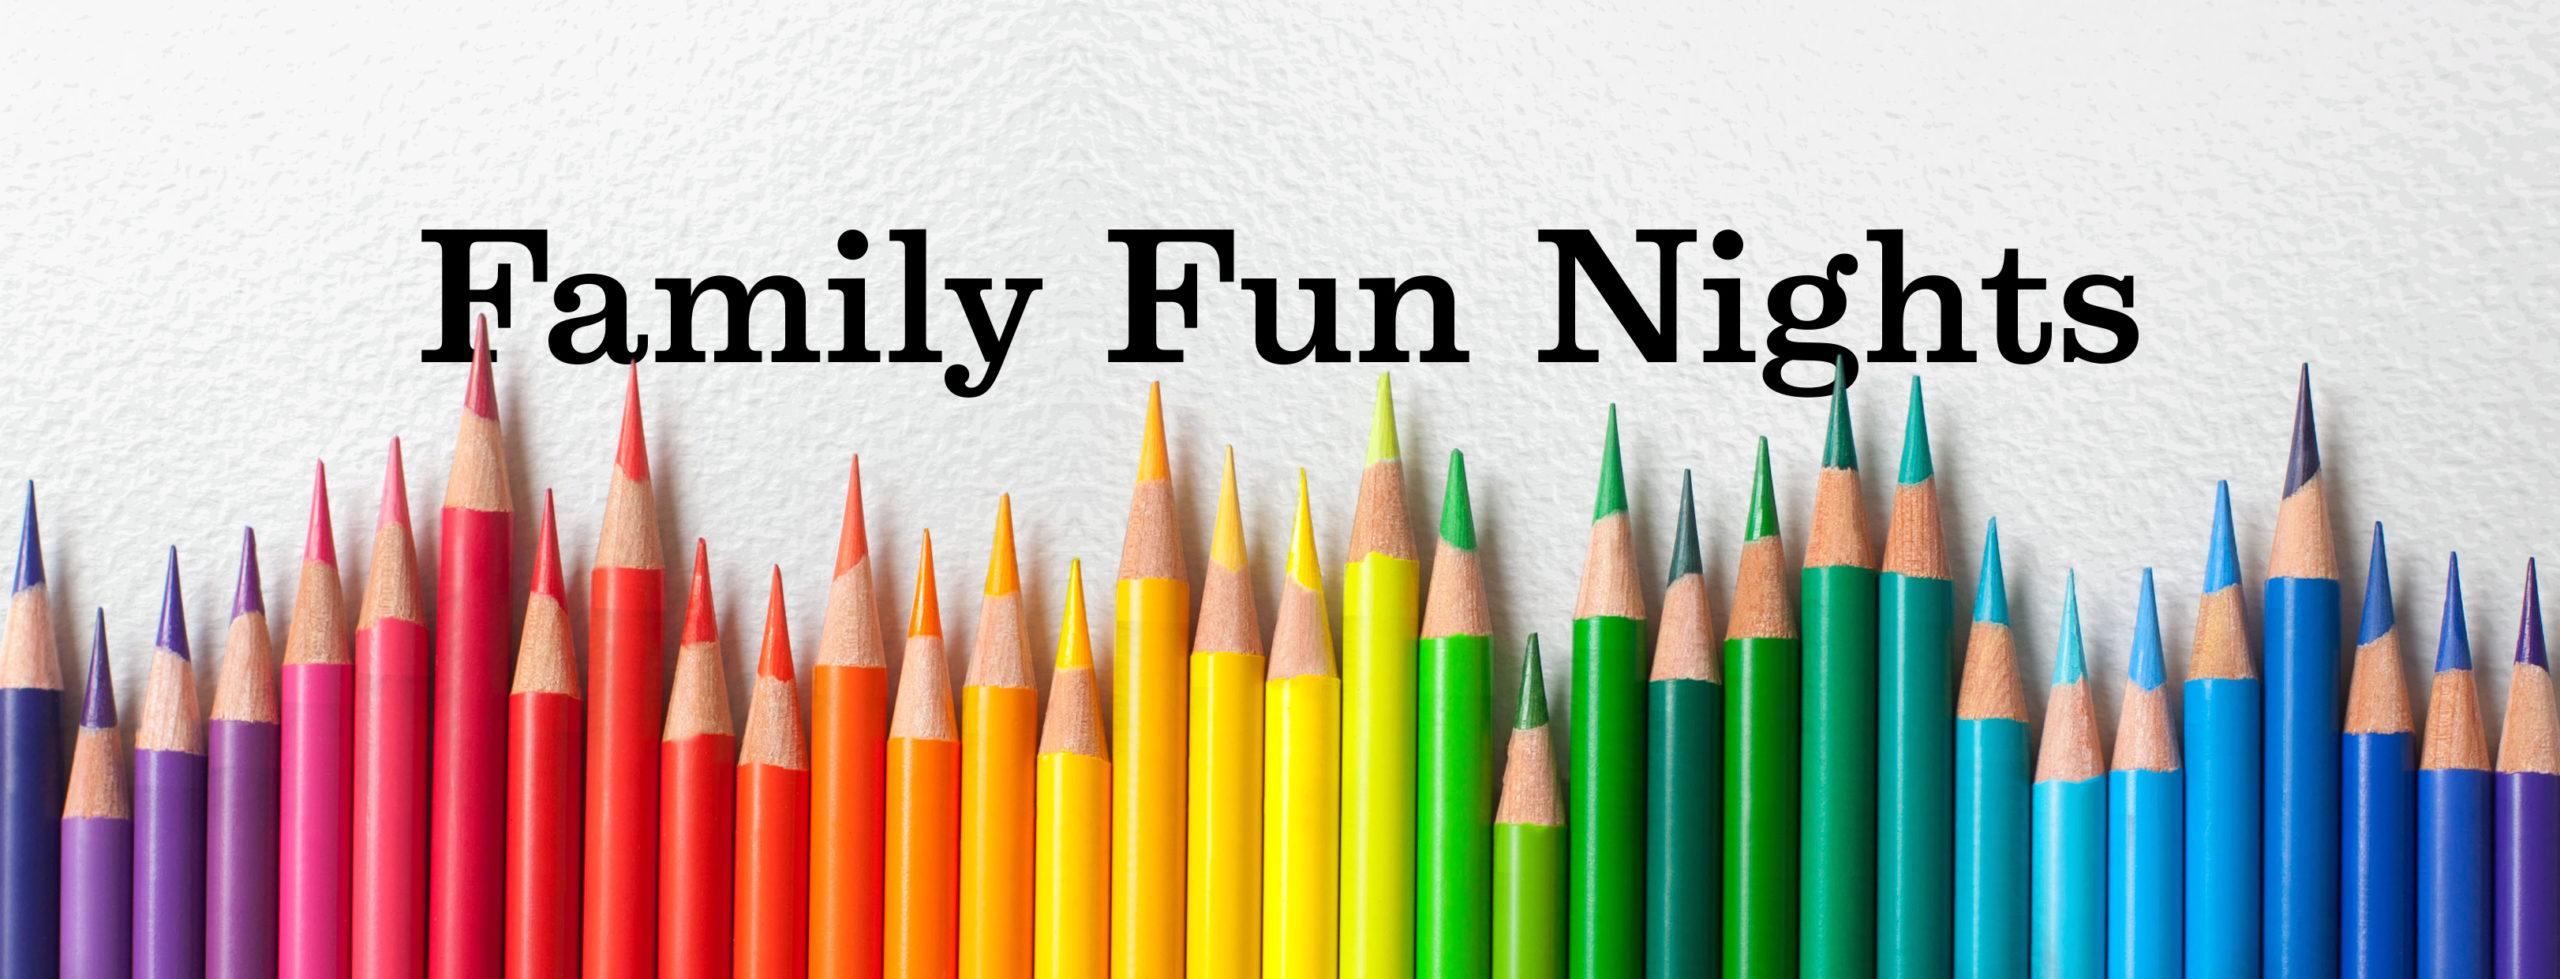 Family Fun Night - Image of colored pencils